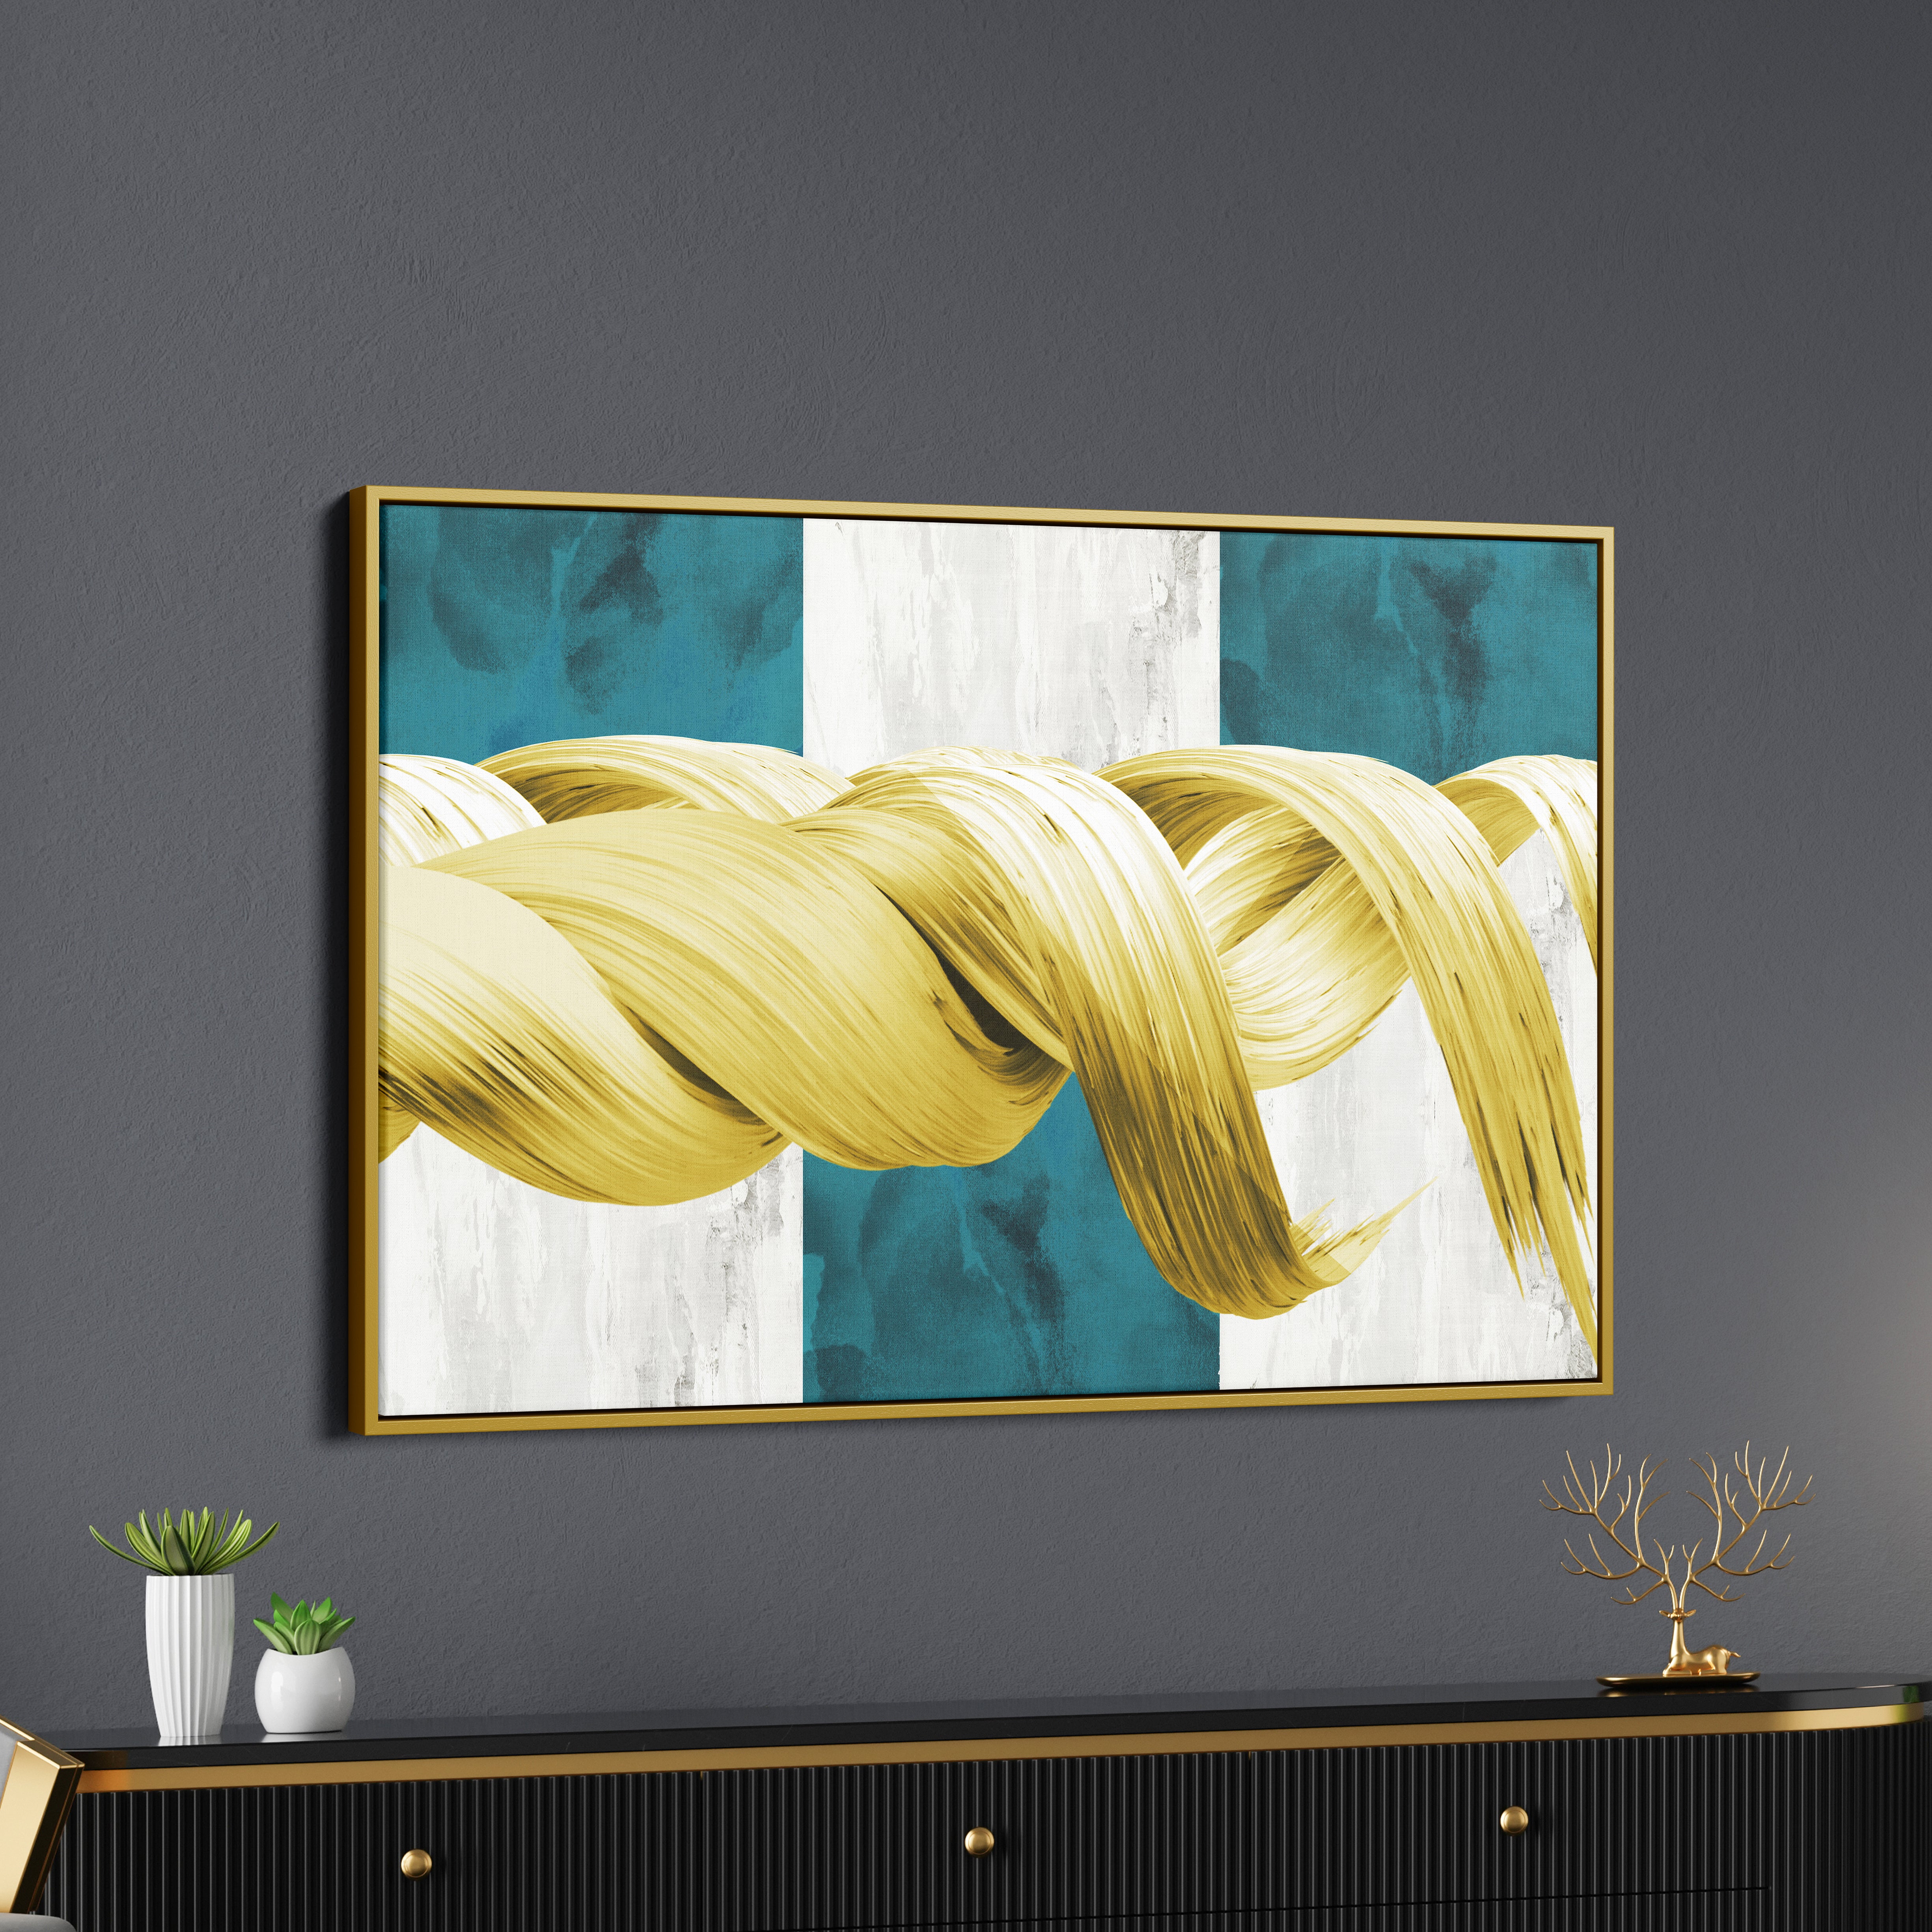 Abstract Golden And Green Mordern Art Canvas Wall Painting